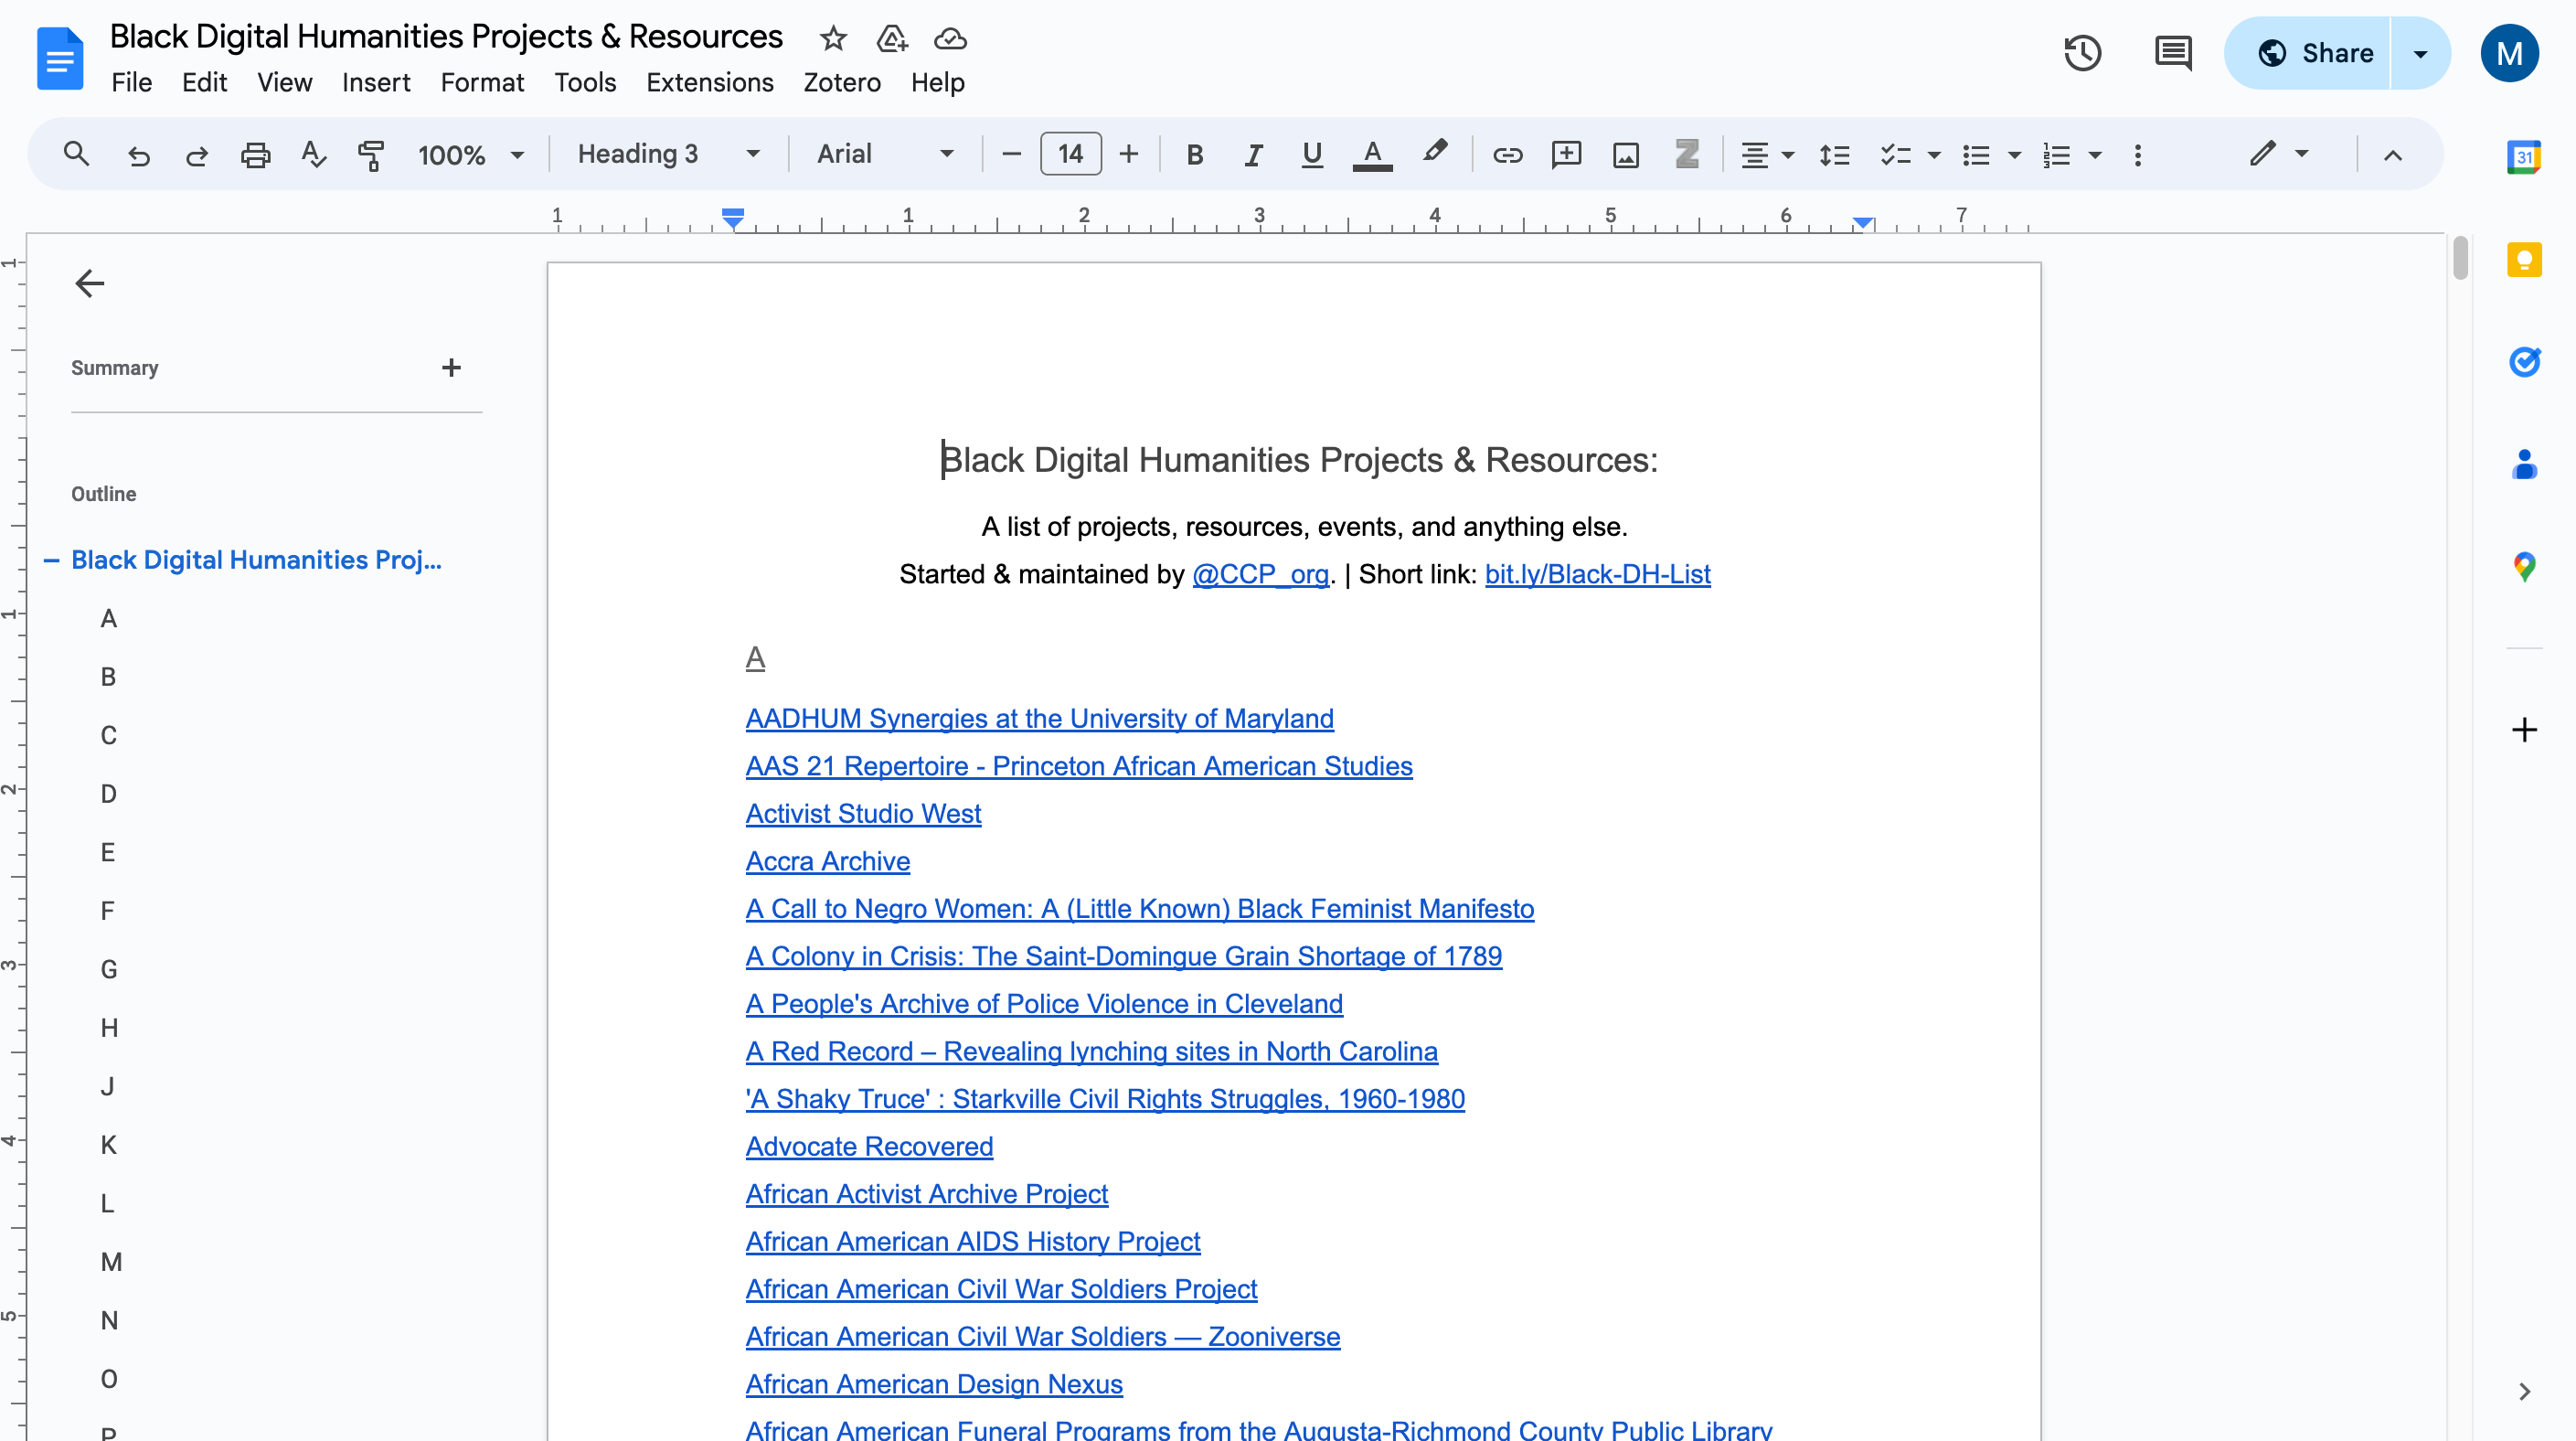 Black Digital Humanities Projects & Resources: A List of Projects, Resources, Events, and Anything Else